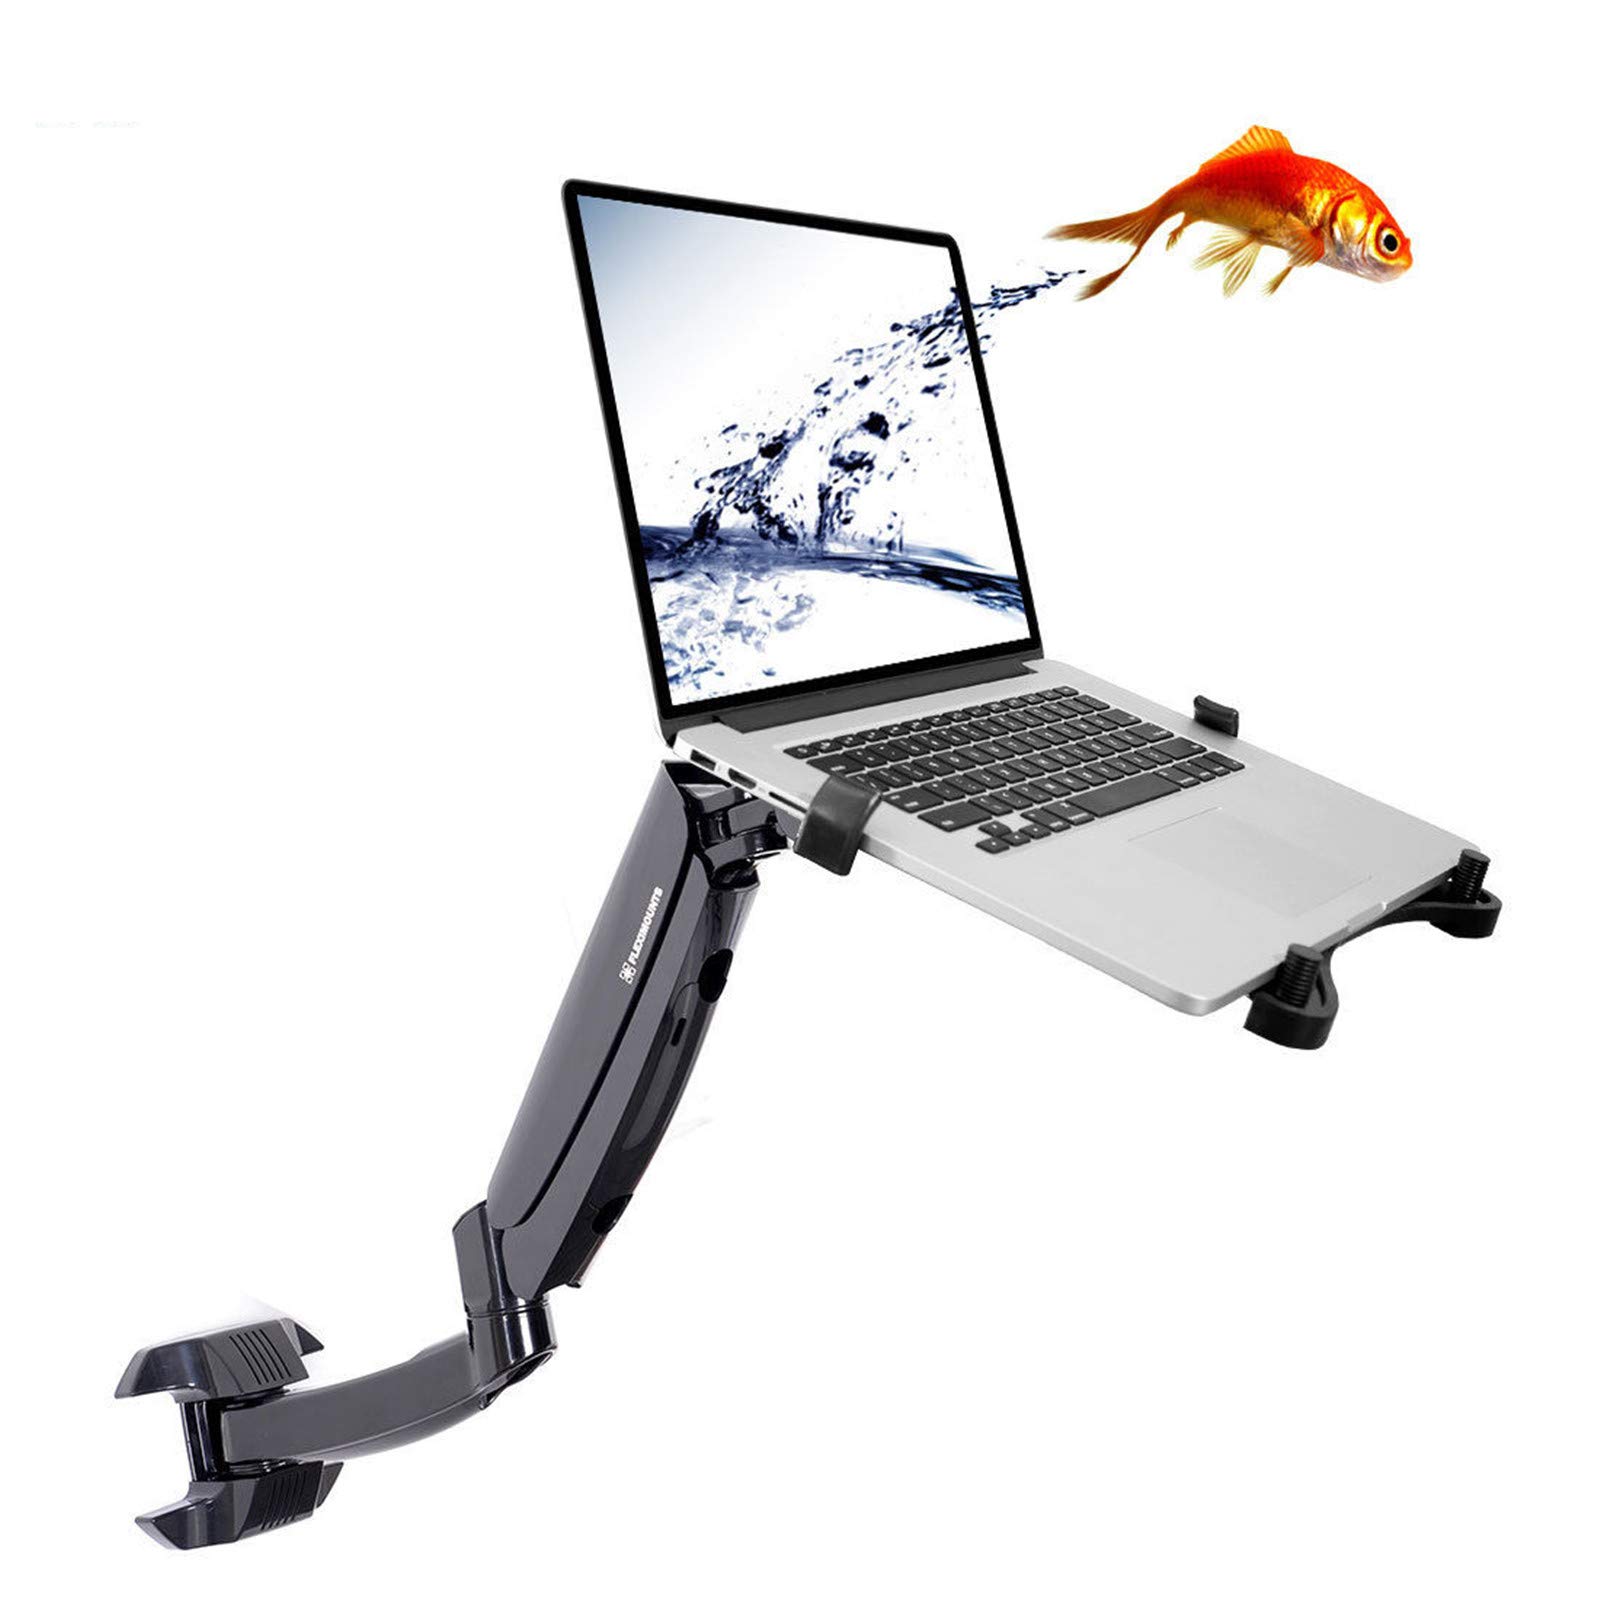 Fleximounts M10 Laptop Wall Mount 2 in 1 LCD arm for 11-17.3 inch Laptop, Notebook Tray Included or 10-24 inch Computer LCDs for Dental Clinic